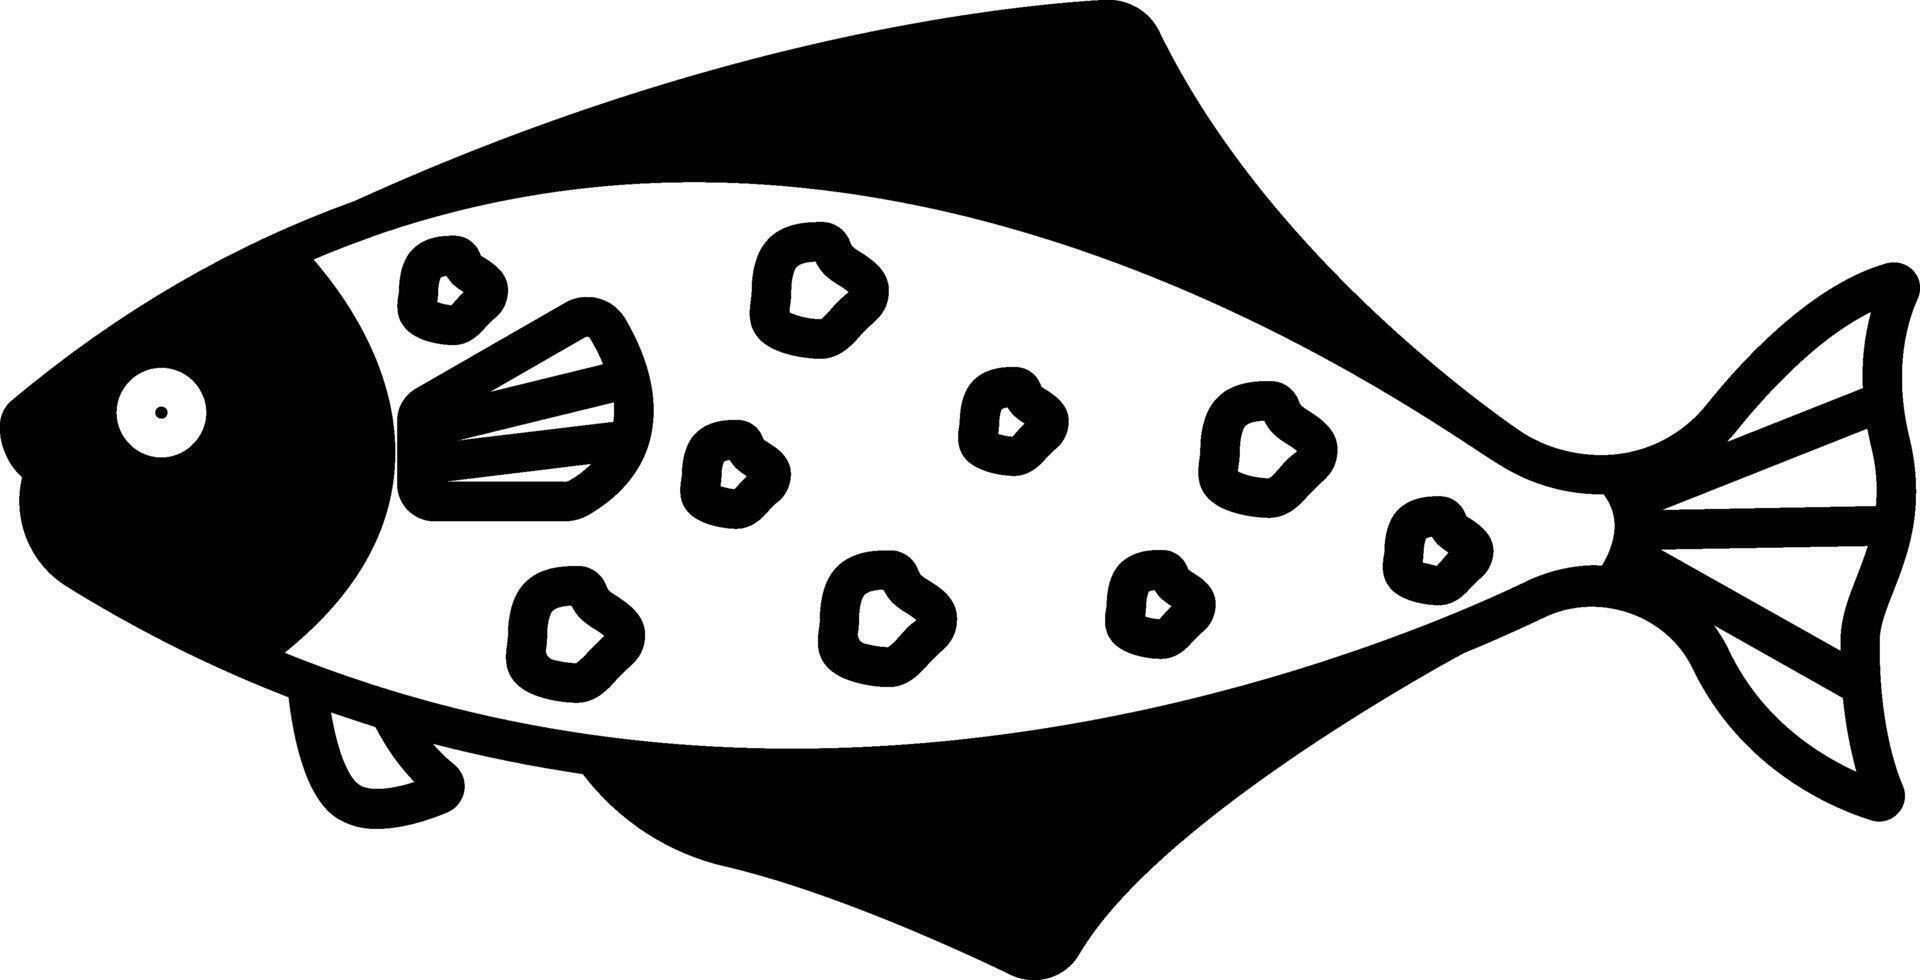 Halibut Fish glyph and line vector illustration